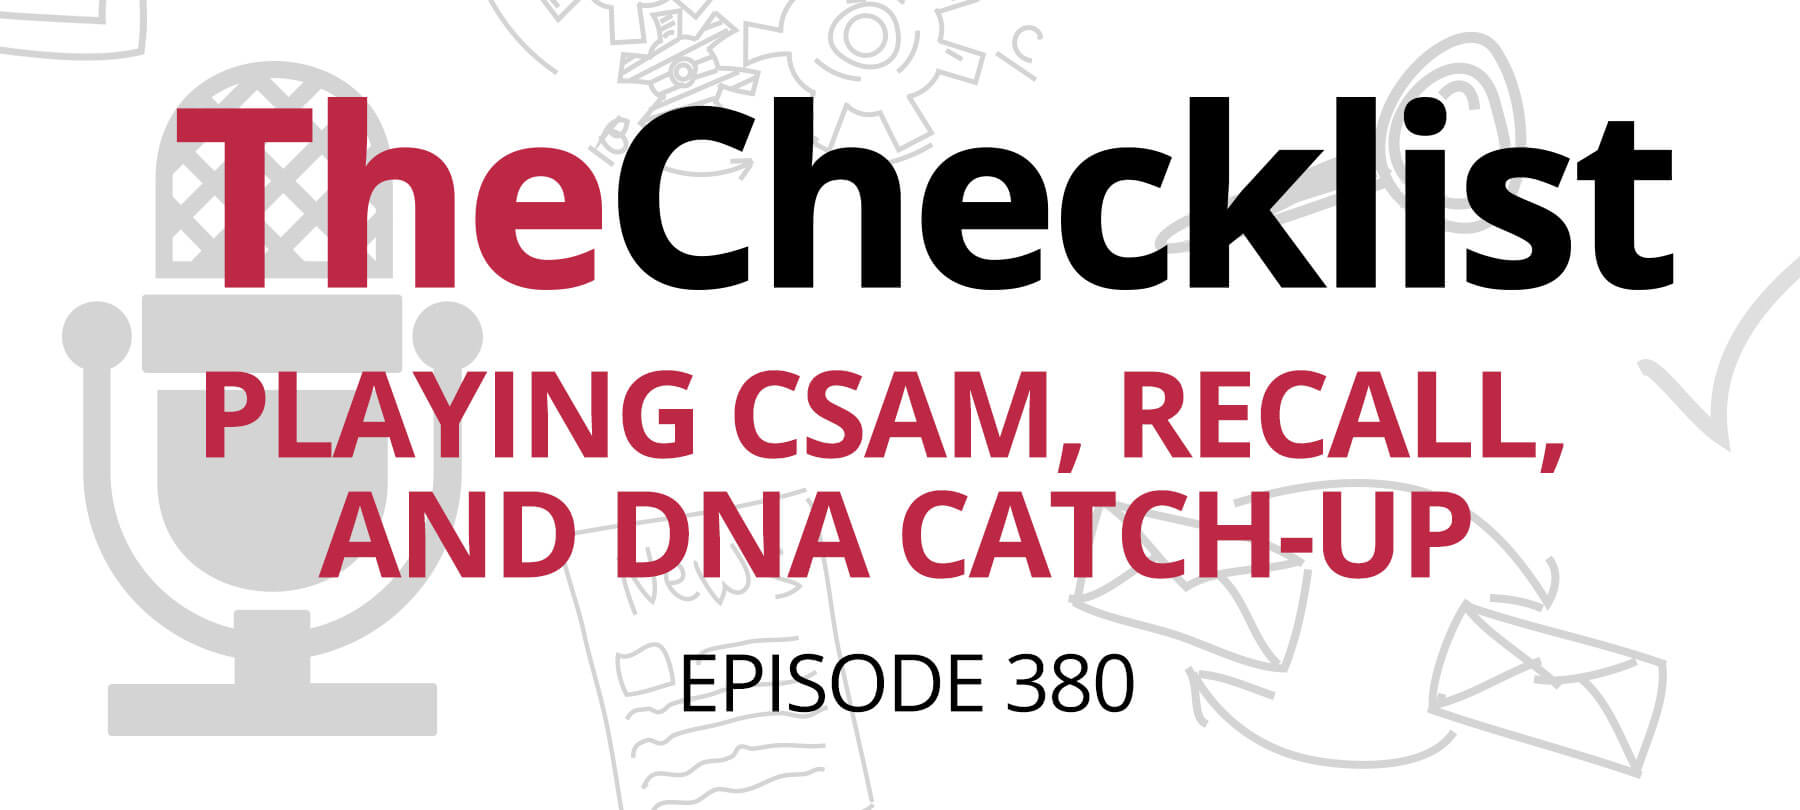 Checklist 380 image header; Checklist 380: Playing CSAM, Recall, and DNA Catch-Up